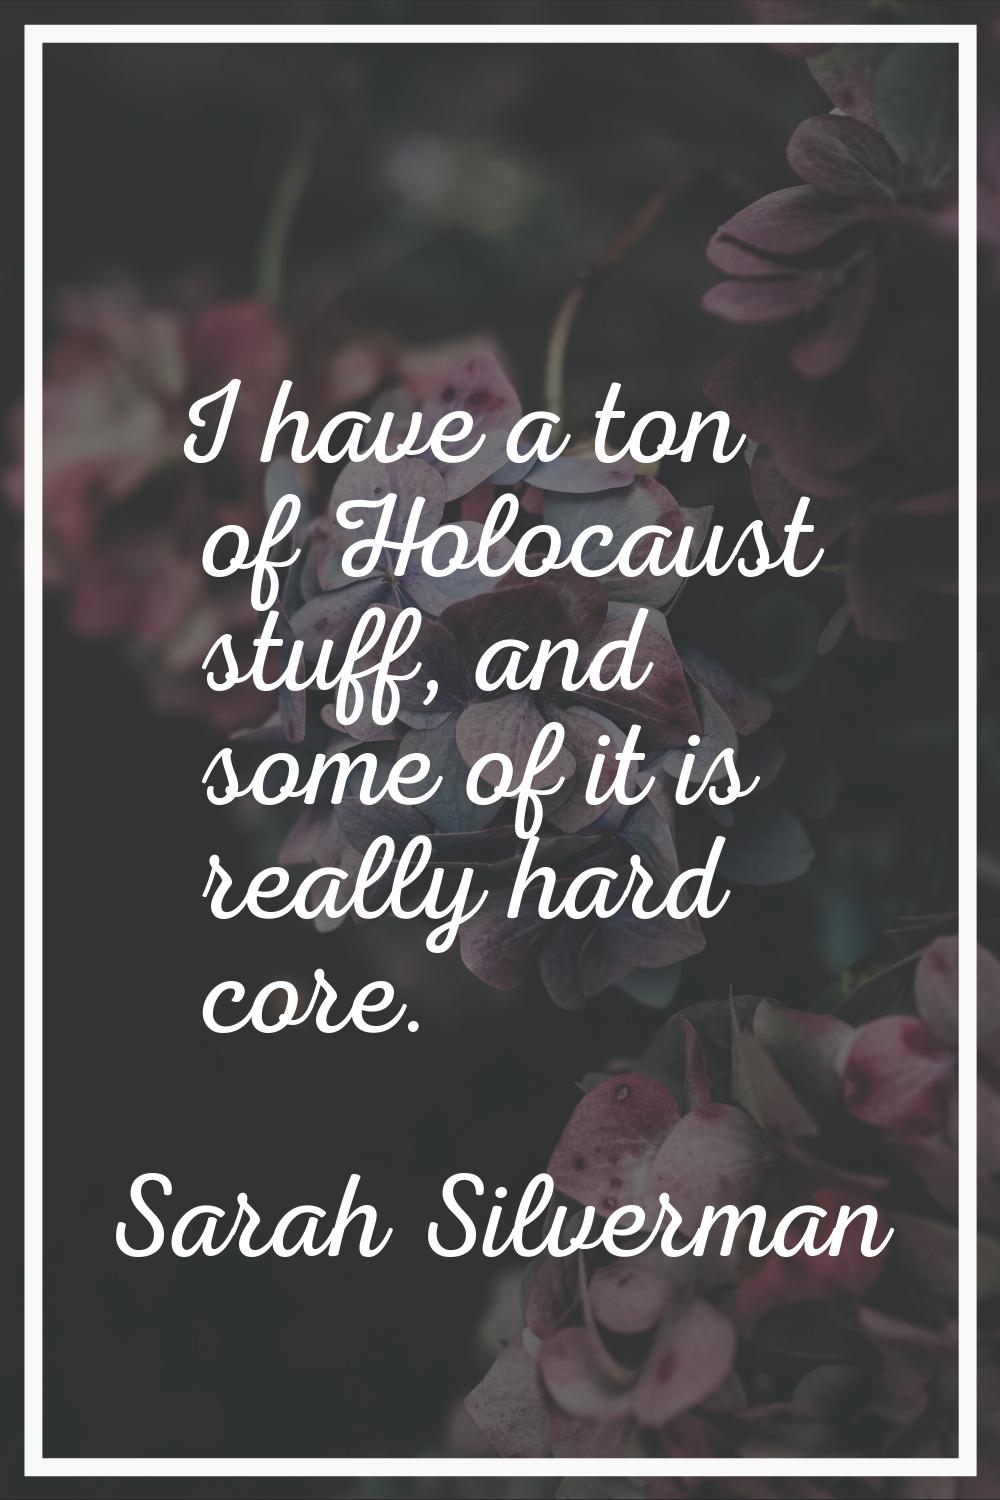 I have a ton of Holocaust stuff, and some of it is really hard core.